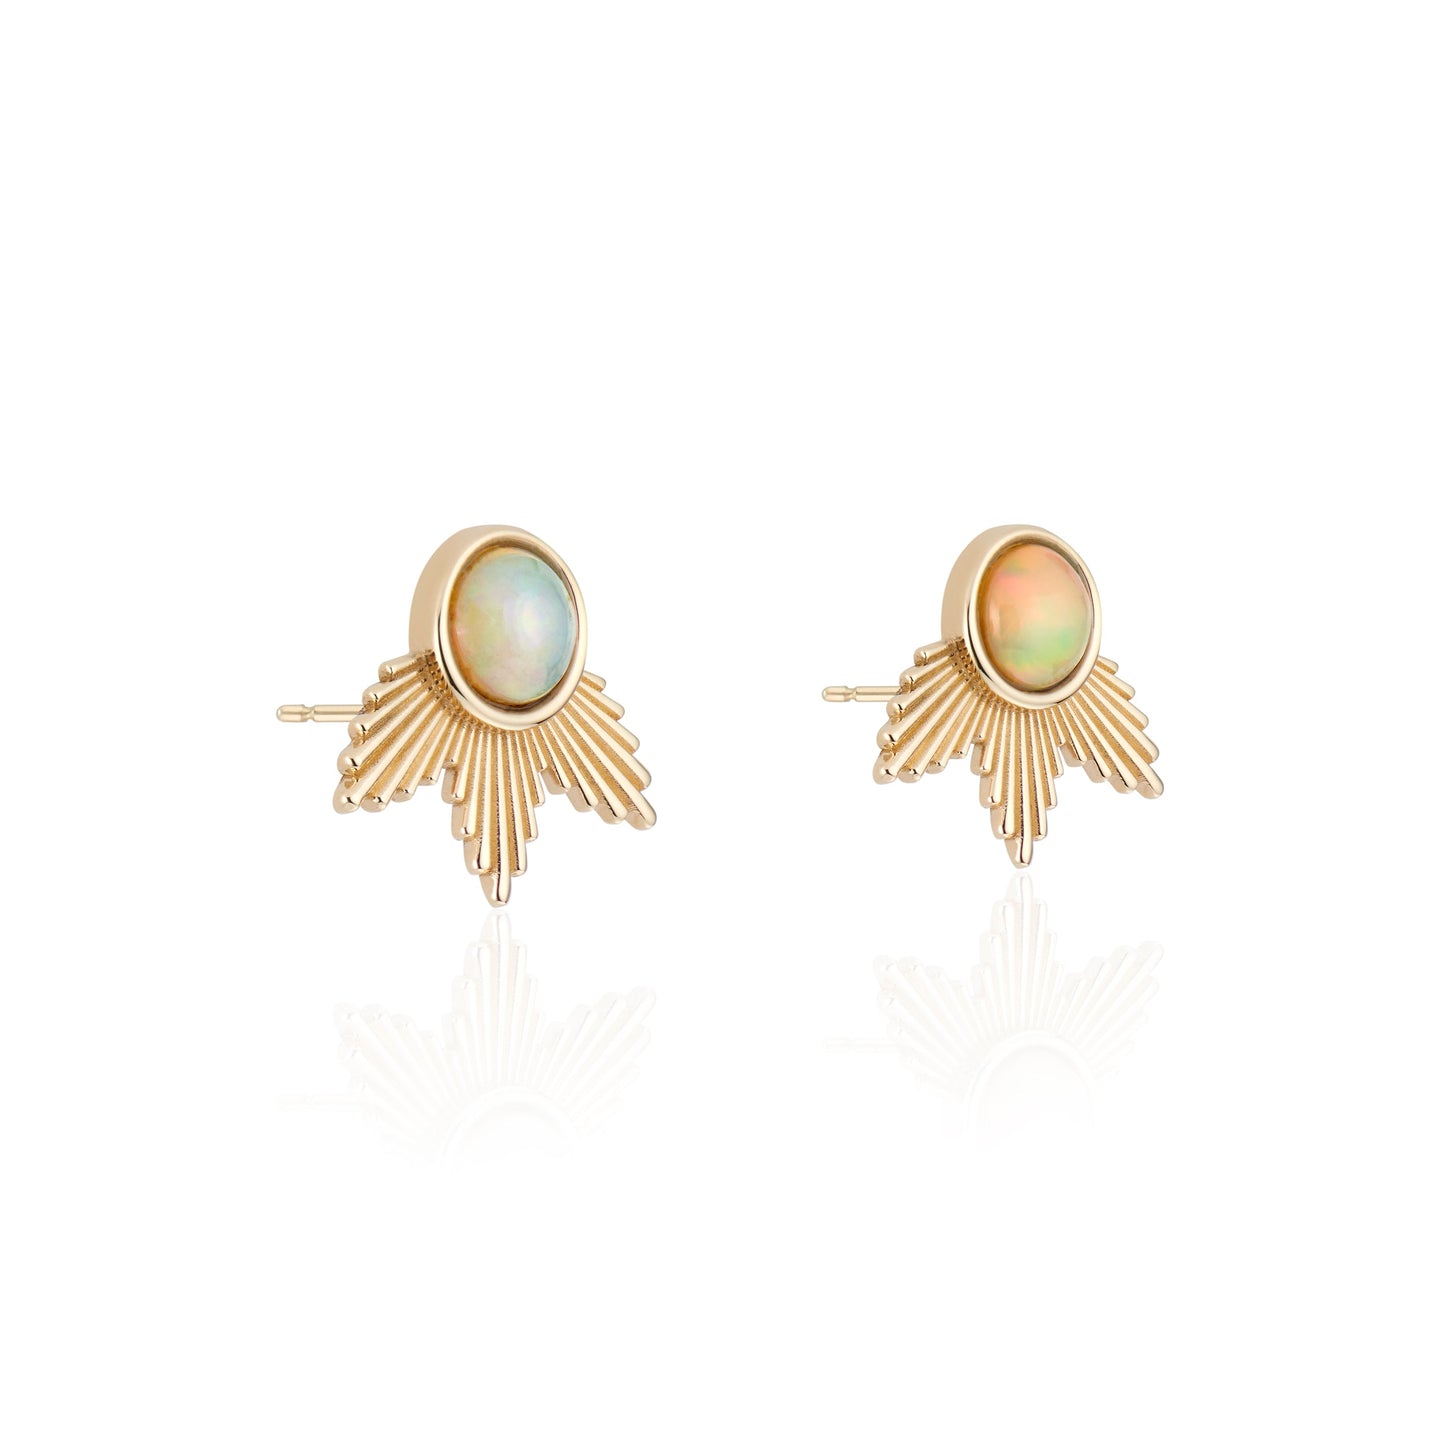 Revival Icarus Earrings with Opals